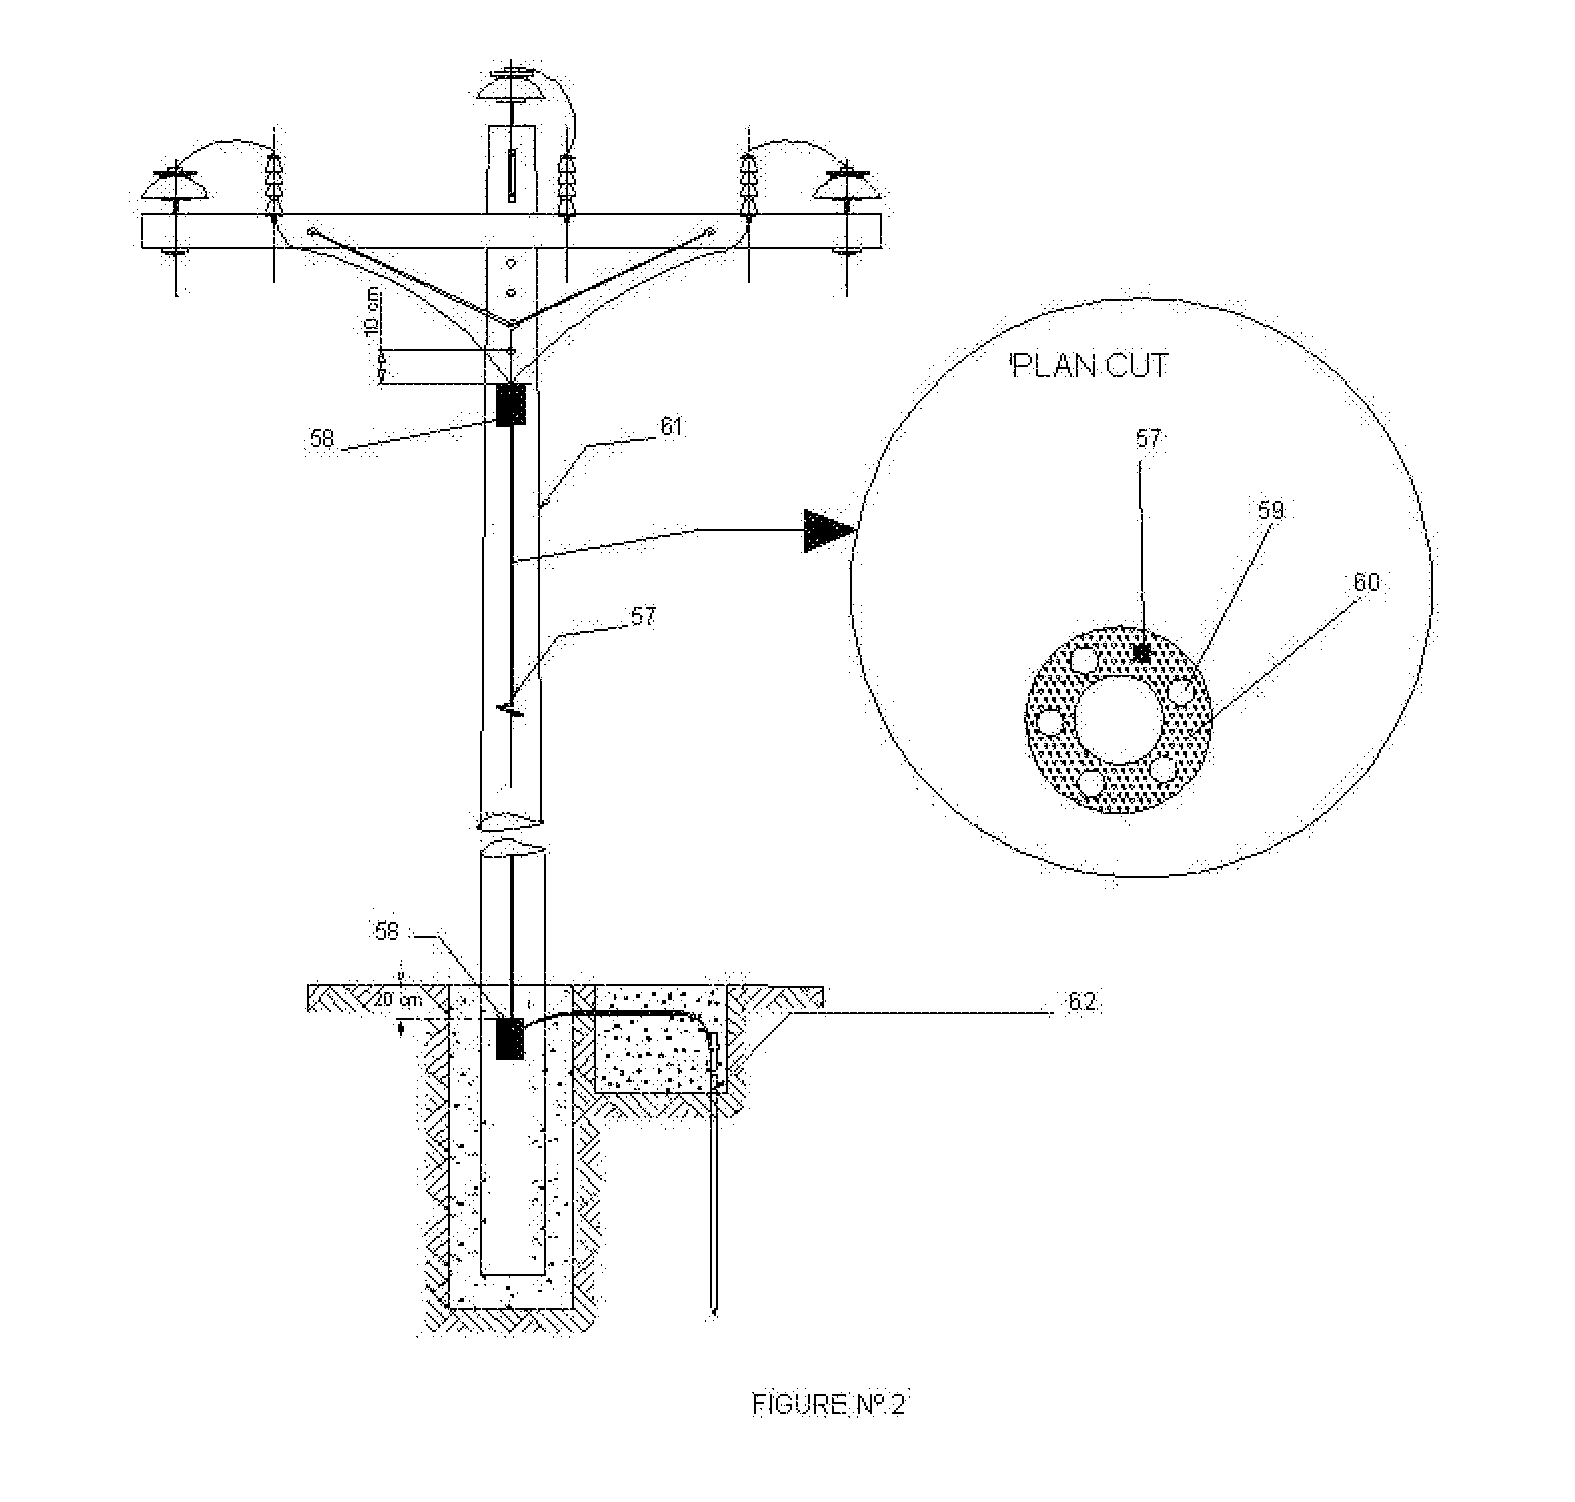 Electric energy distribution pole with incorporated ground system